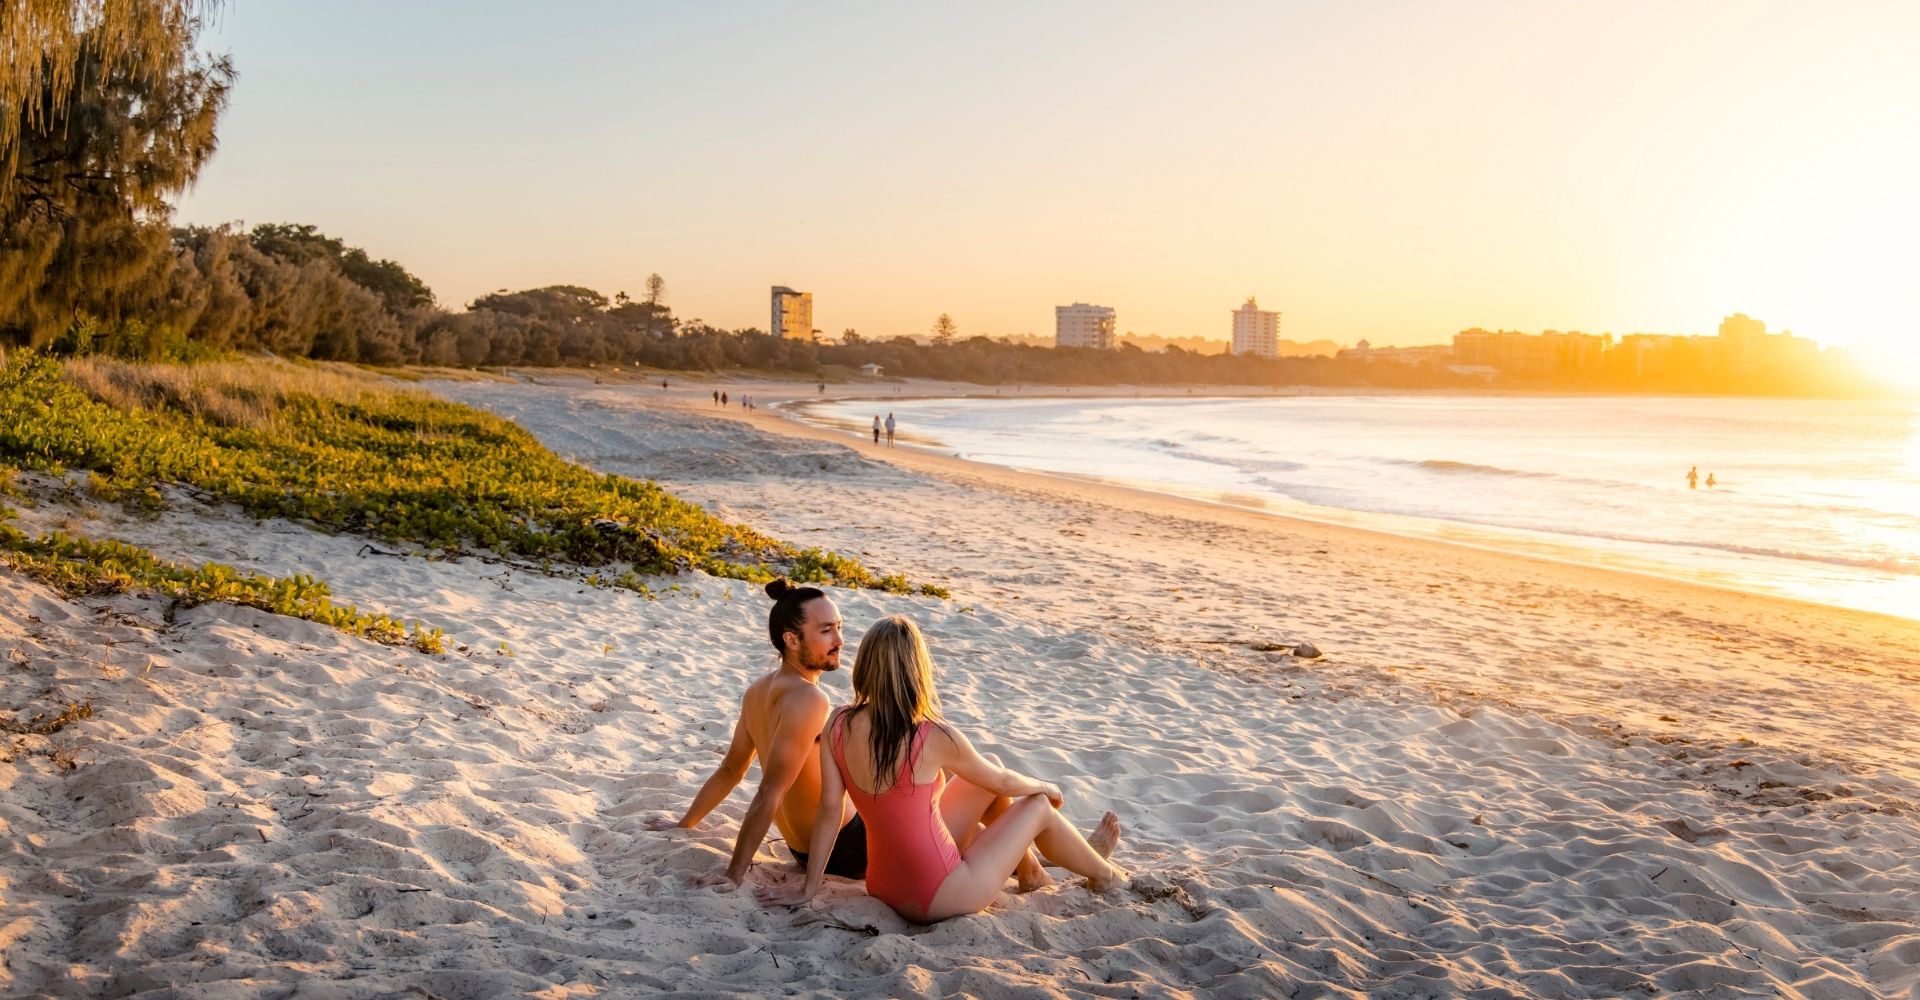 Mooloolaba named one of the Top 10 Beaches in the South Pacific!